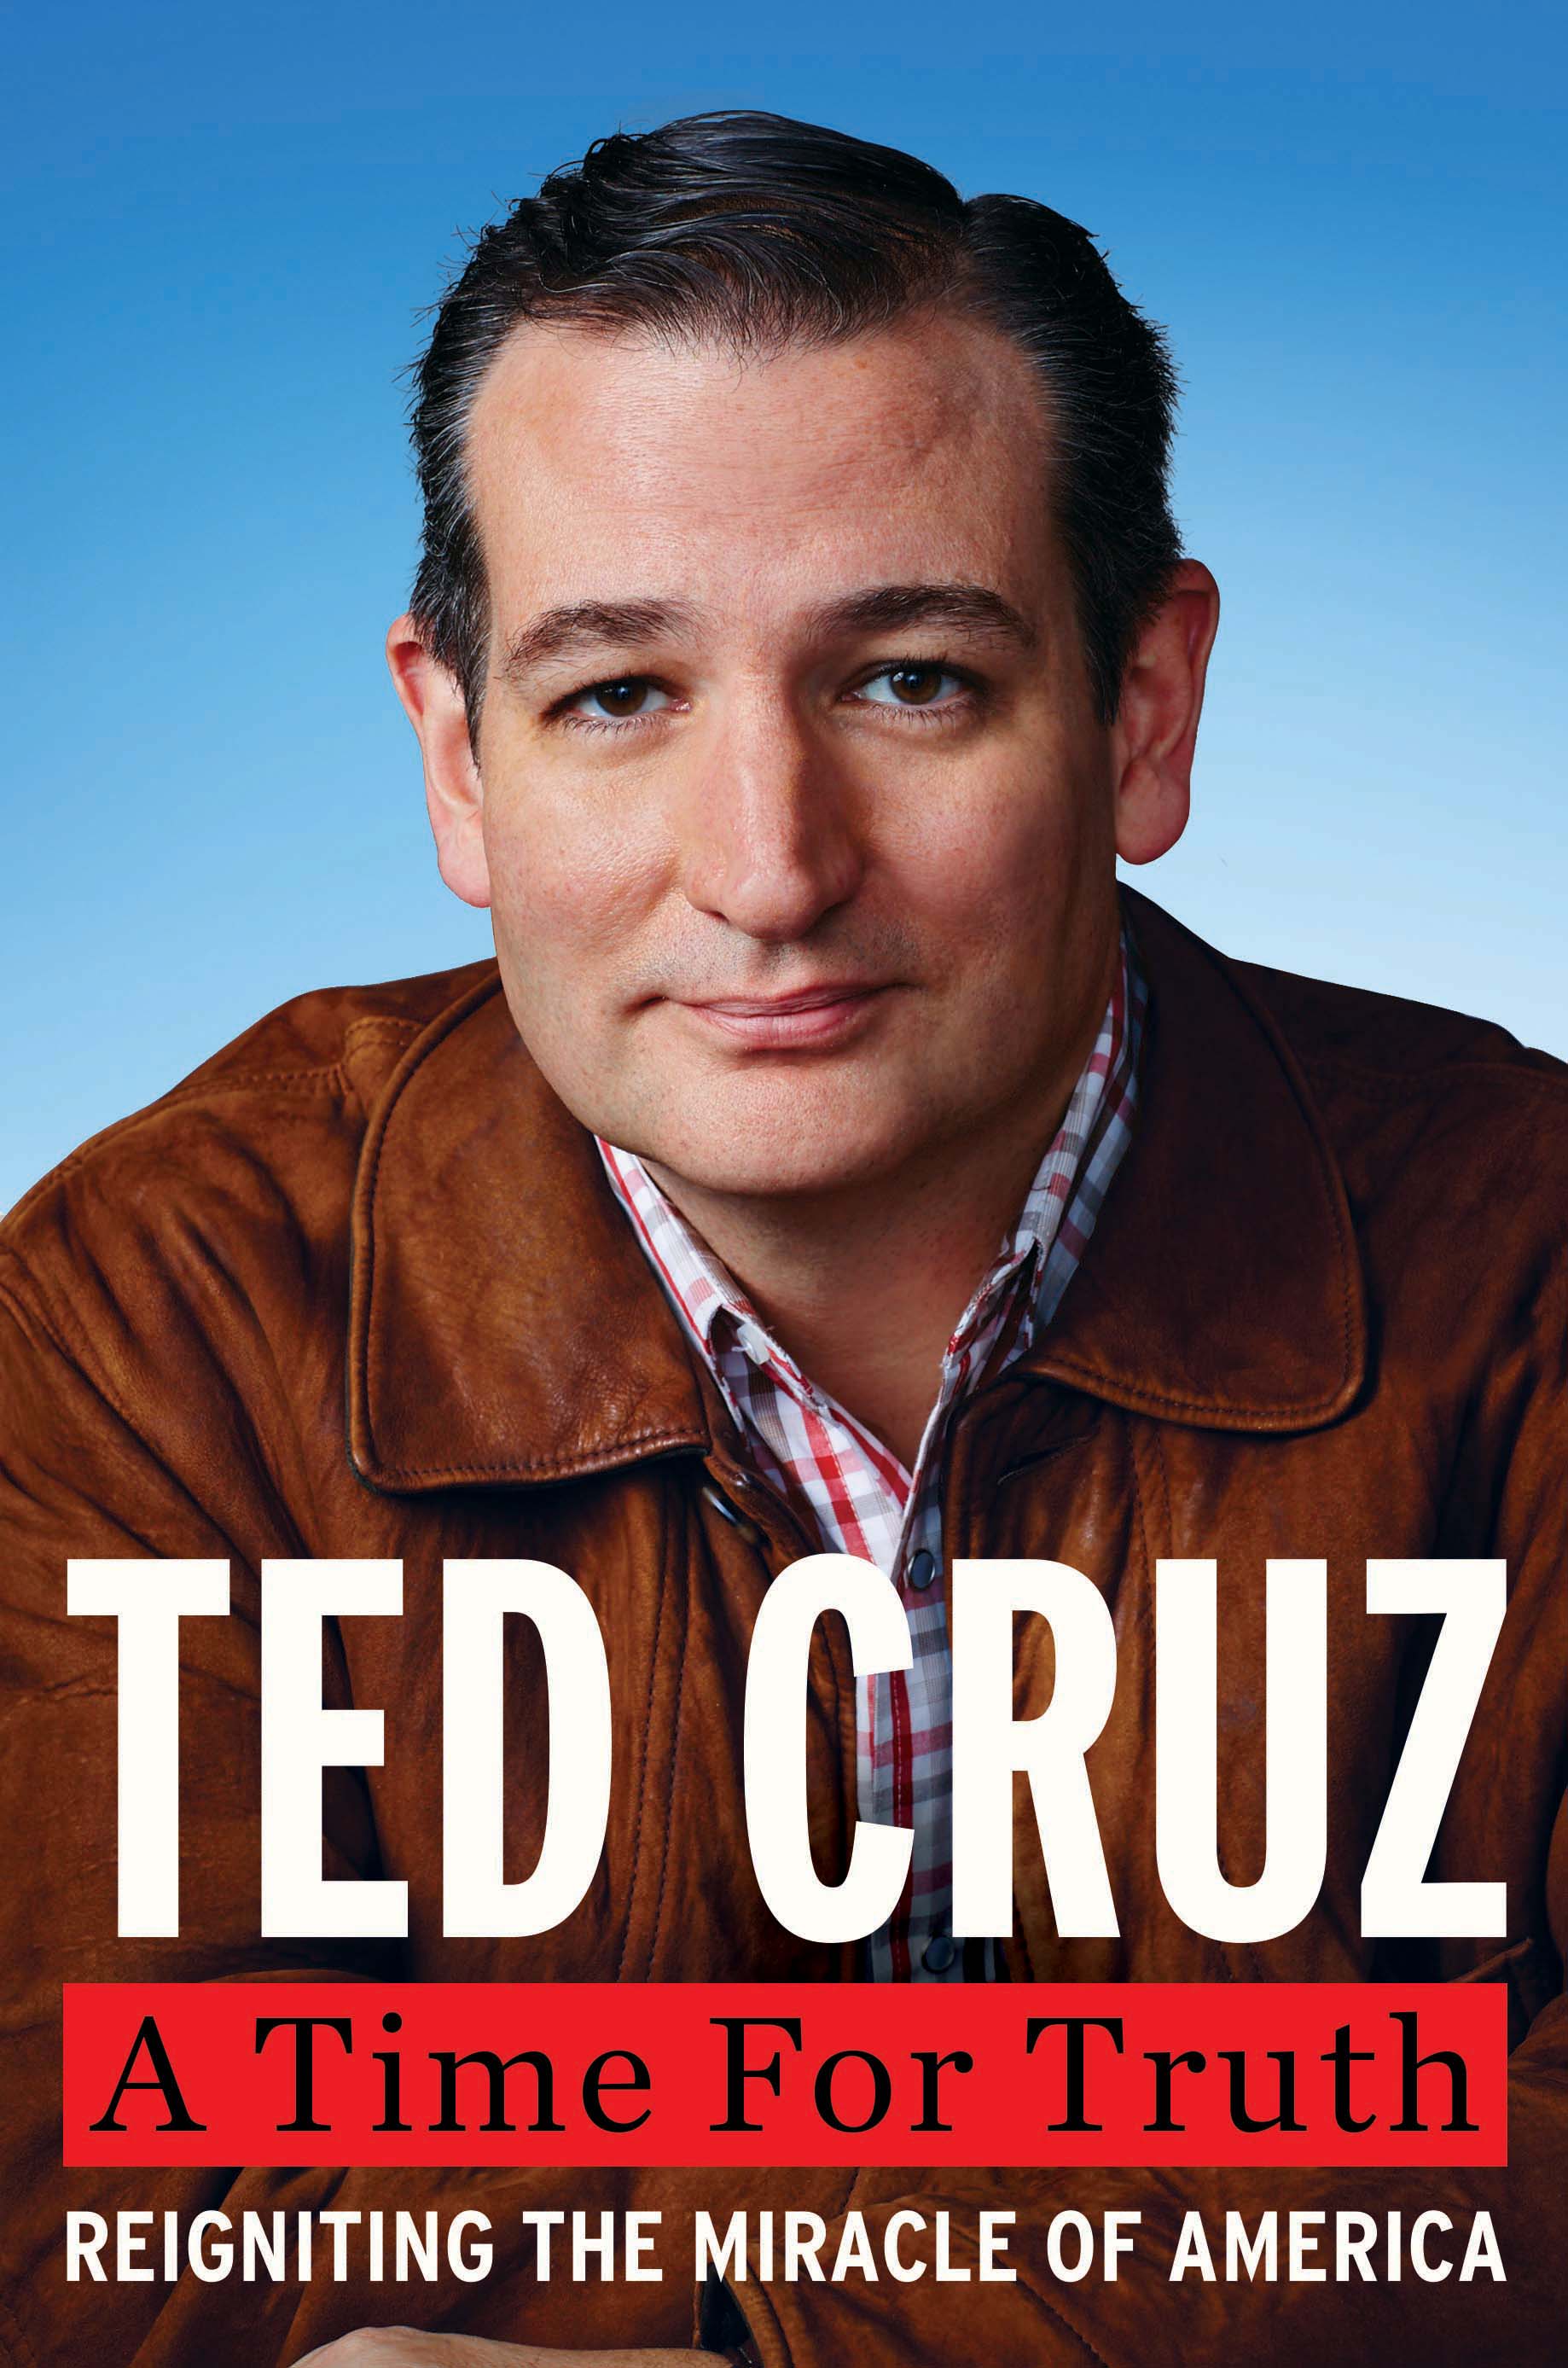 Texas Sen. Ted Cruz's 2015  book also pitches him as a truth teller, with a casual portrait and the title  A Time for Truth.